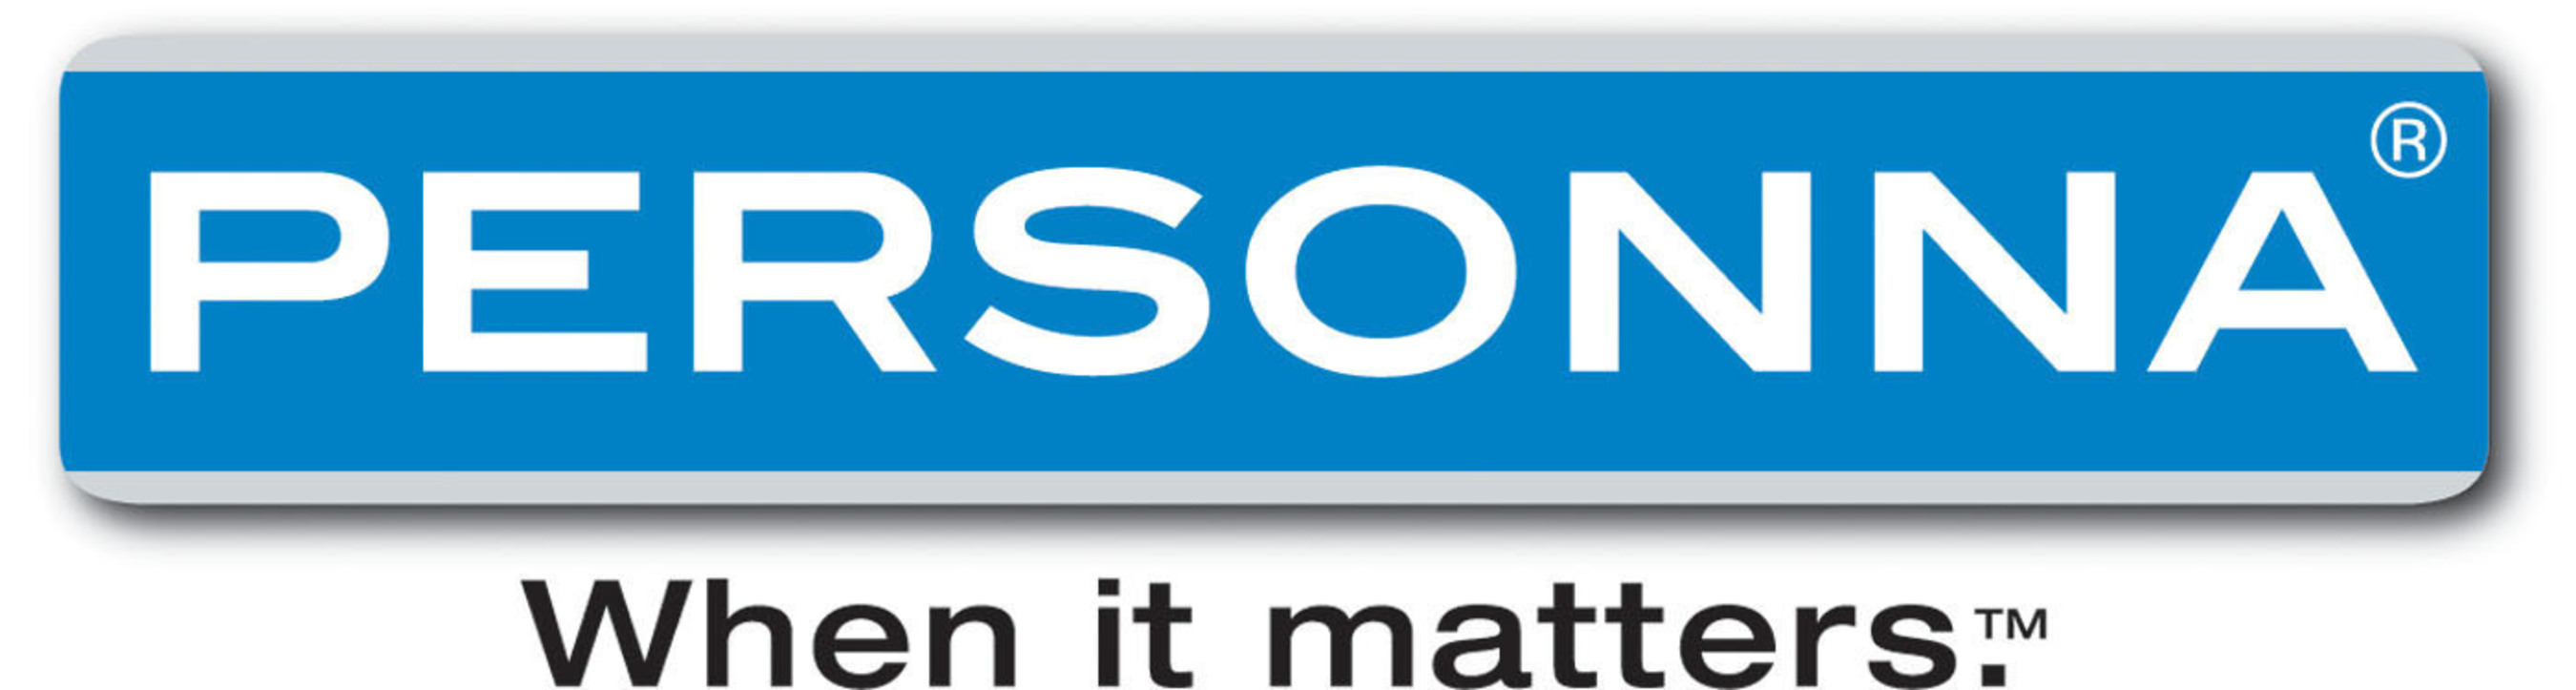 Personna(R) When it matters logo. Personna is one of the largest producers of professional, medical, and industrial blades with manufacturing facilities in North America. Personna is dedicated to creating blades and bladed products that satisfy the needs of professional, medical and industrial customers. From the most basic to the most advanced product, our goal is to deliver quality, performance and innovation. (PRNewsFoto/Personna) (PRNewsFoto/PERSONNA)